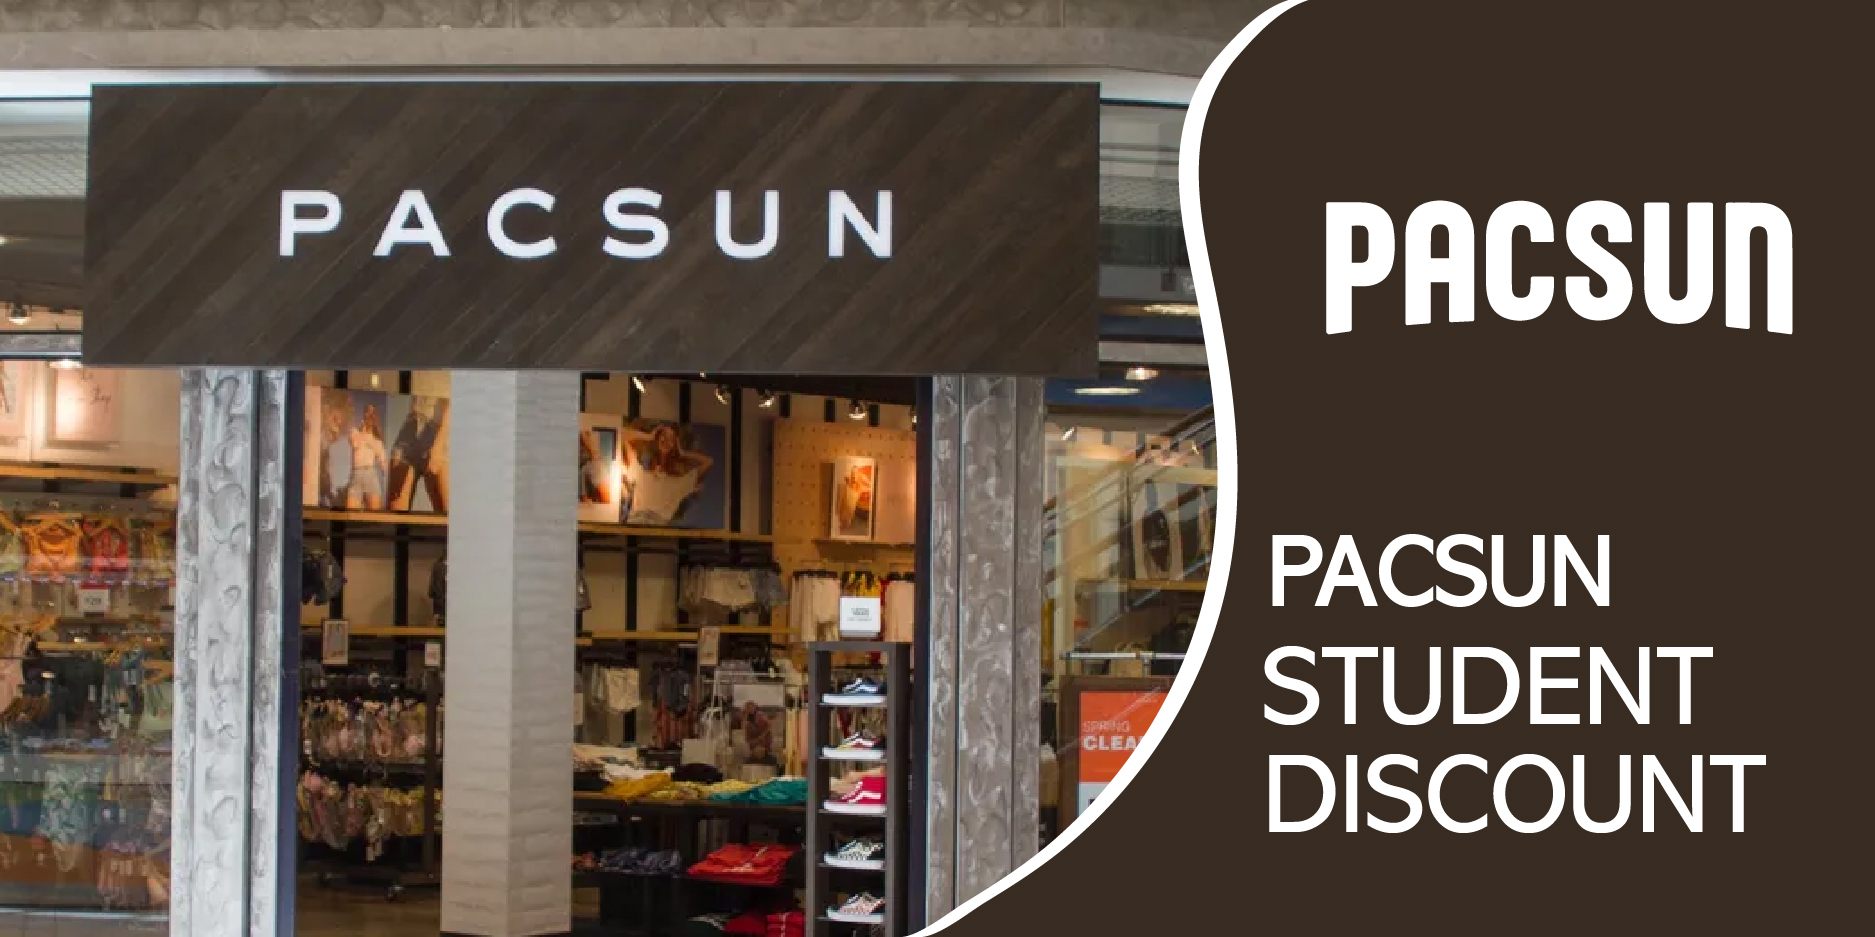 Pacsun Student Discount